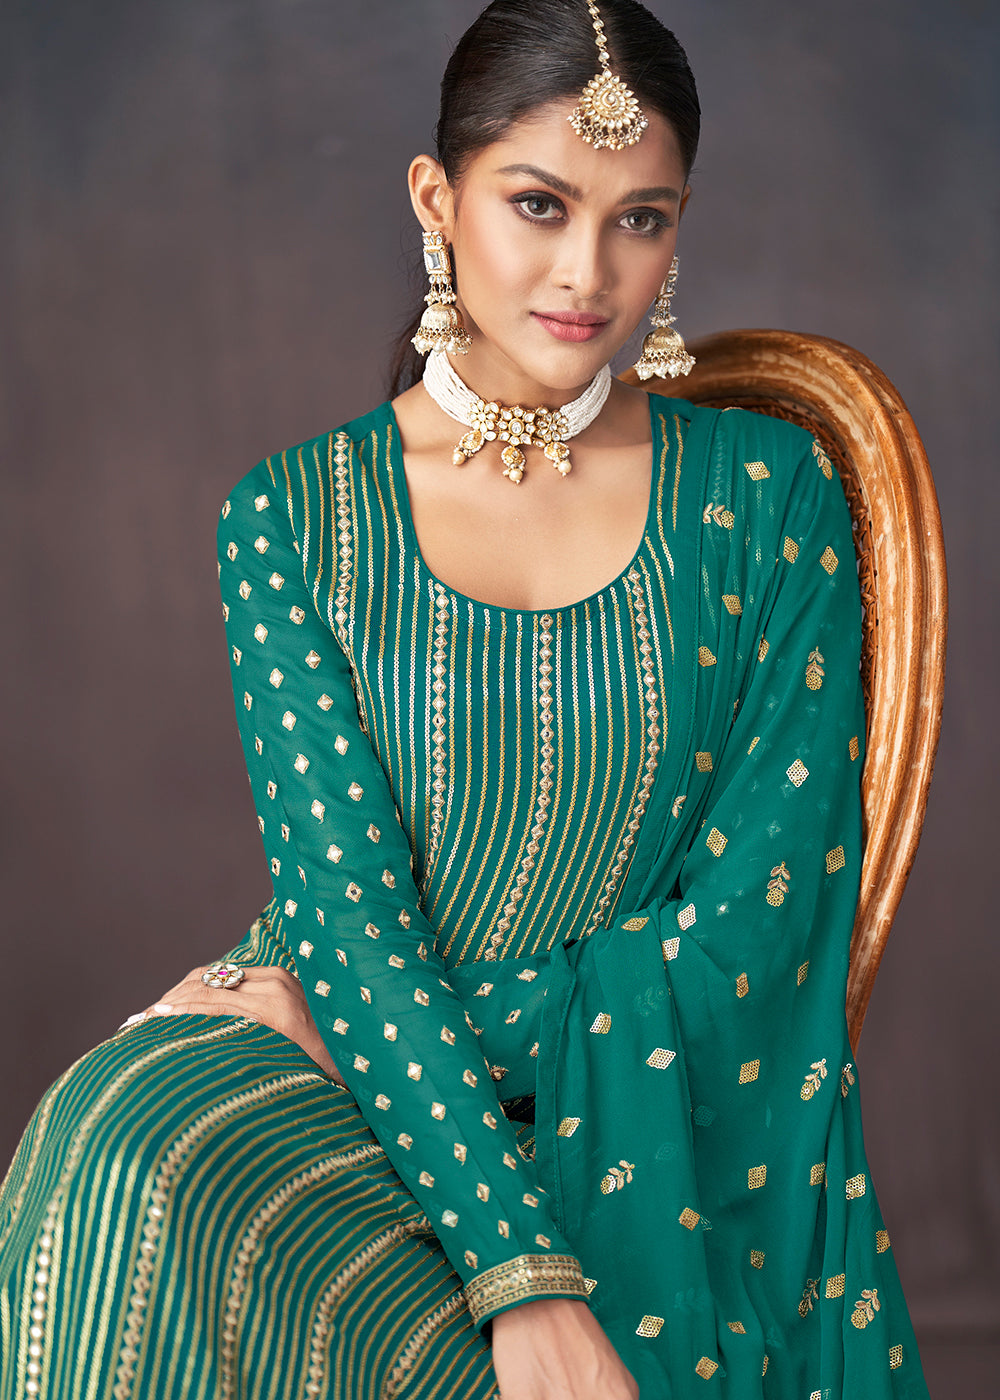 Shop Now Jade Green Georgette Embellished Festive Sharara Suit Online at Empress Clothing in USA, UK, Canada & Worldwide. 